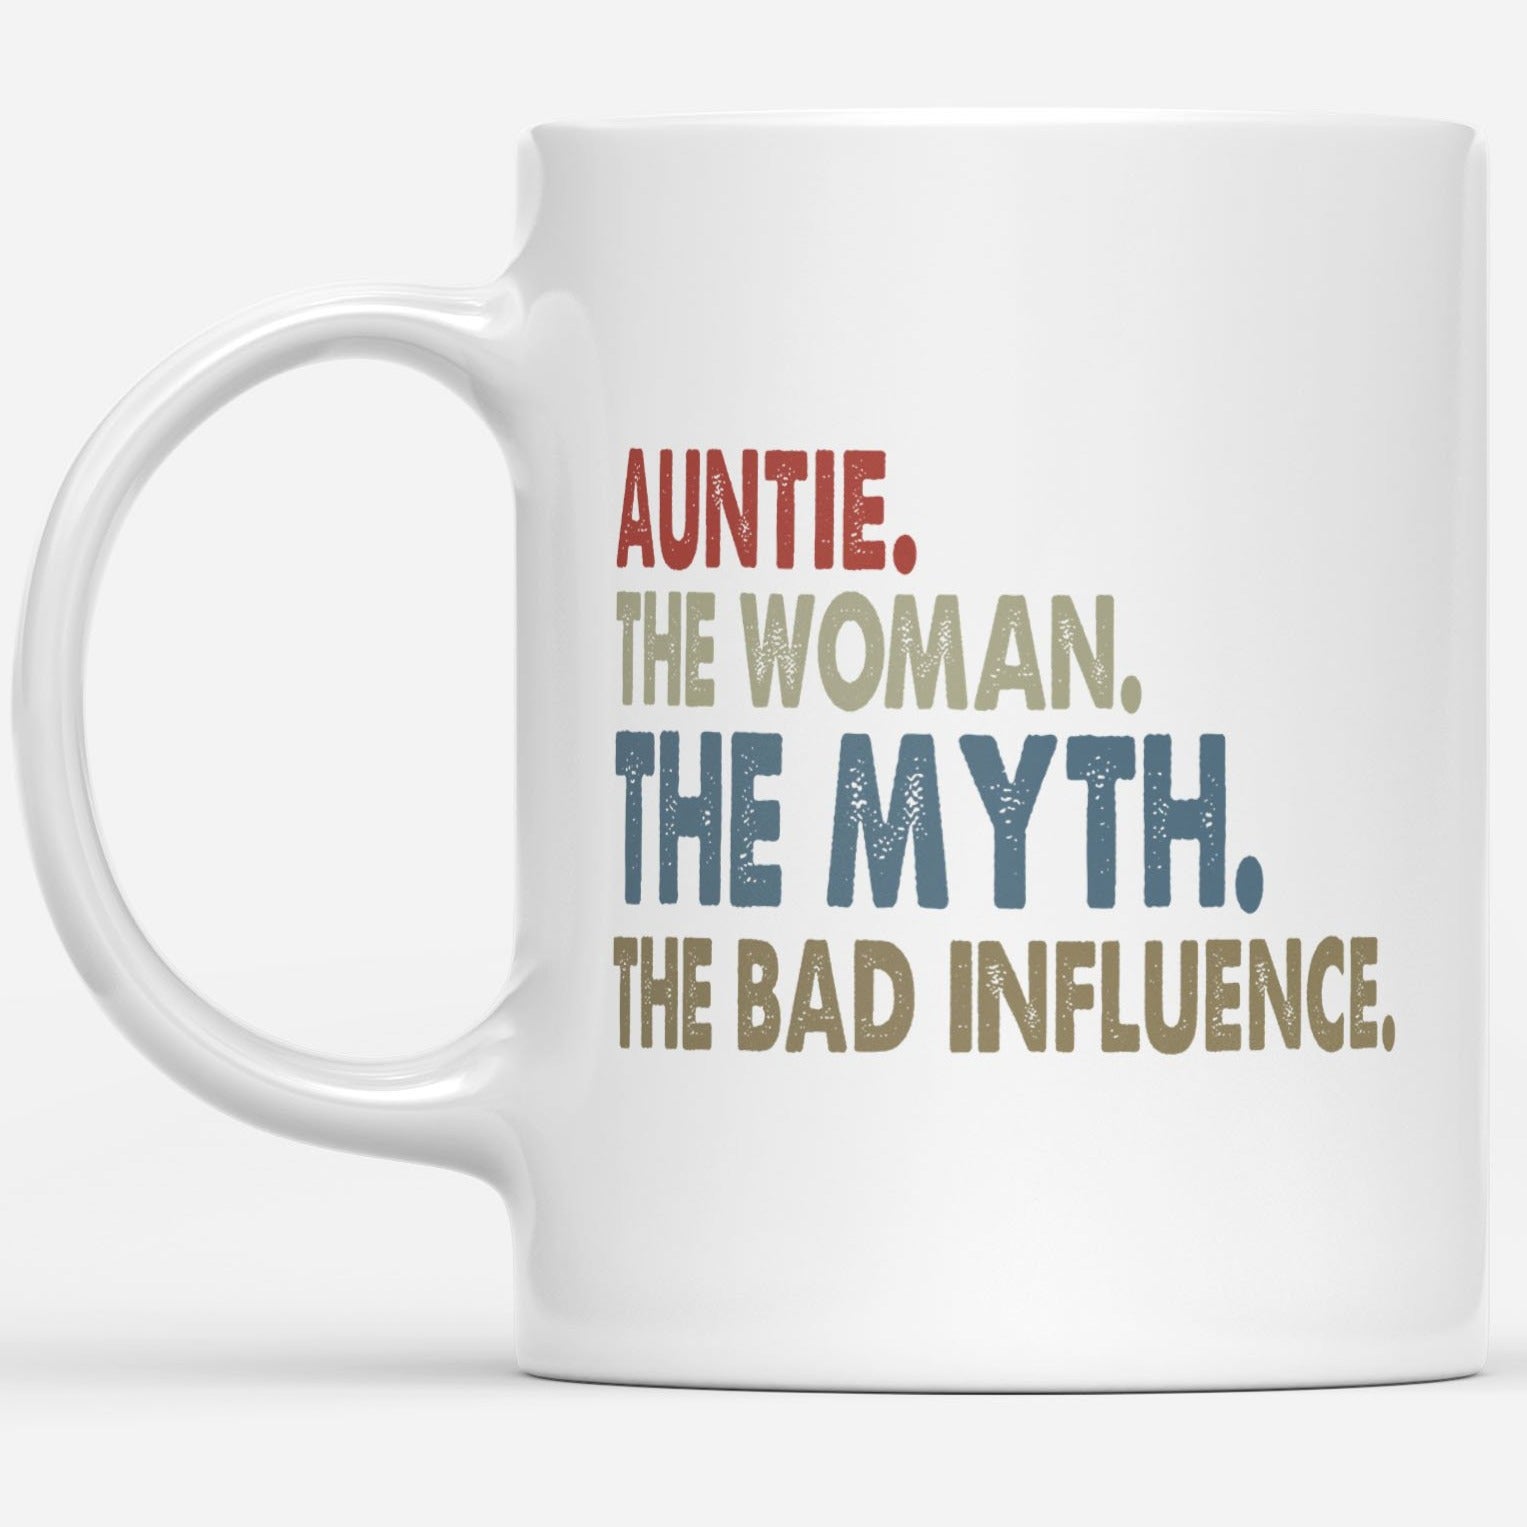 Auntie The Woman The Myth The Bad Influence Gift Ideas For Aunt And Women DS White Mug